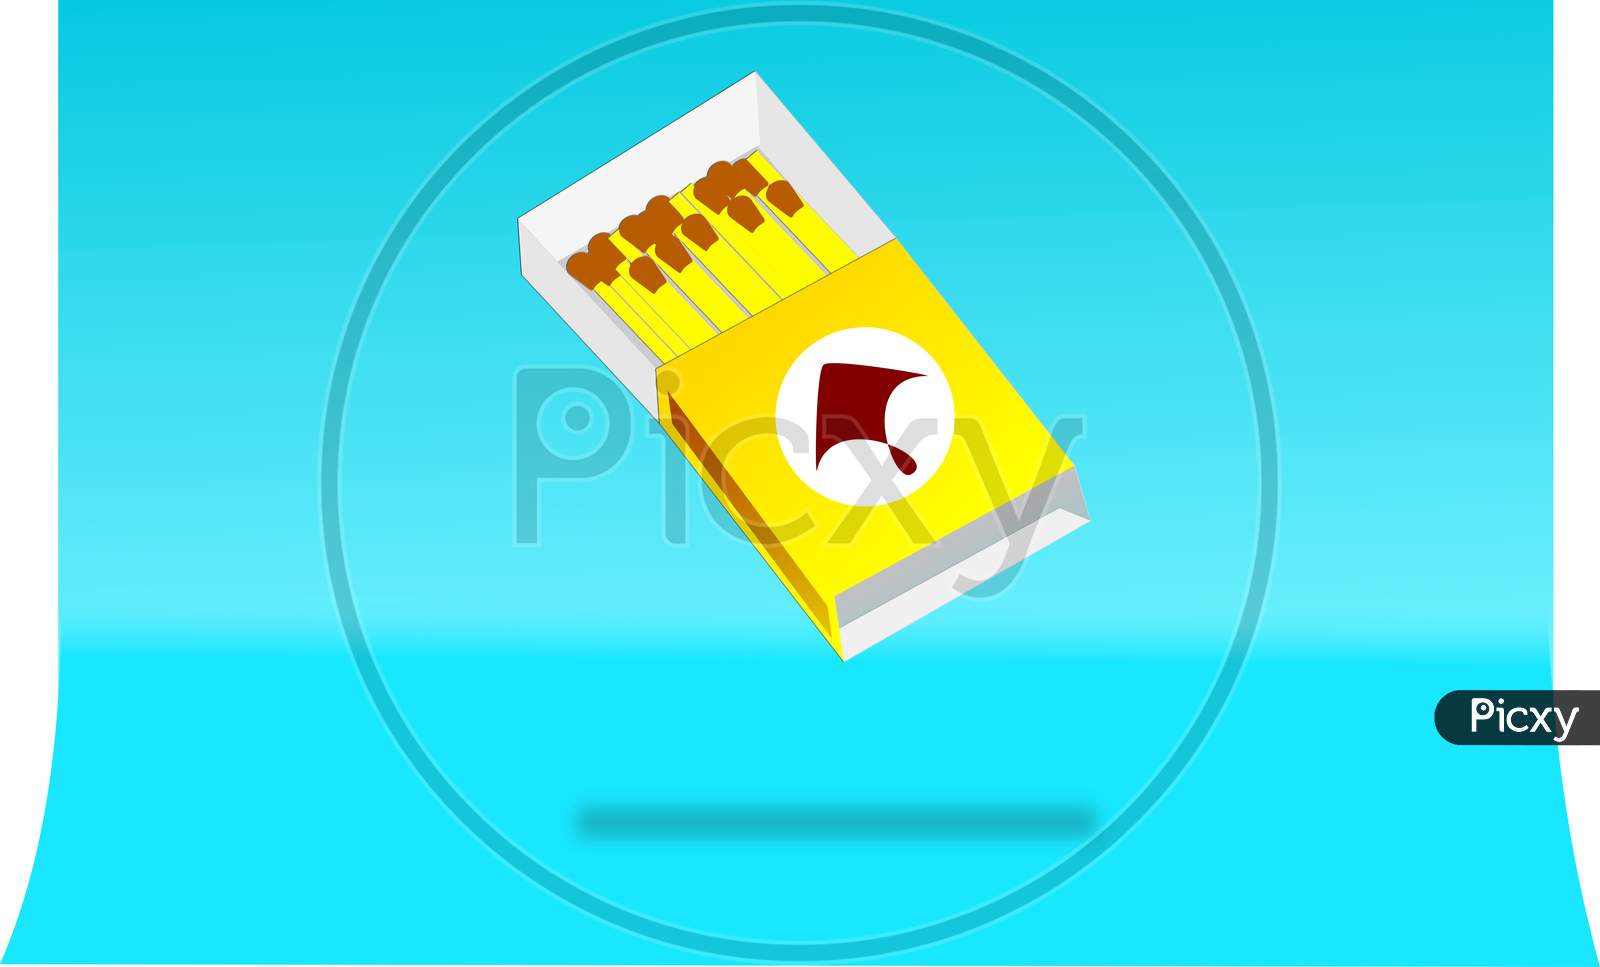 3D Illustration Graphic Of A Matchbox With Match Stick Template Isolated On Blue Background. Isometric Graphic Of A Matchbox.